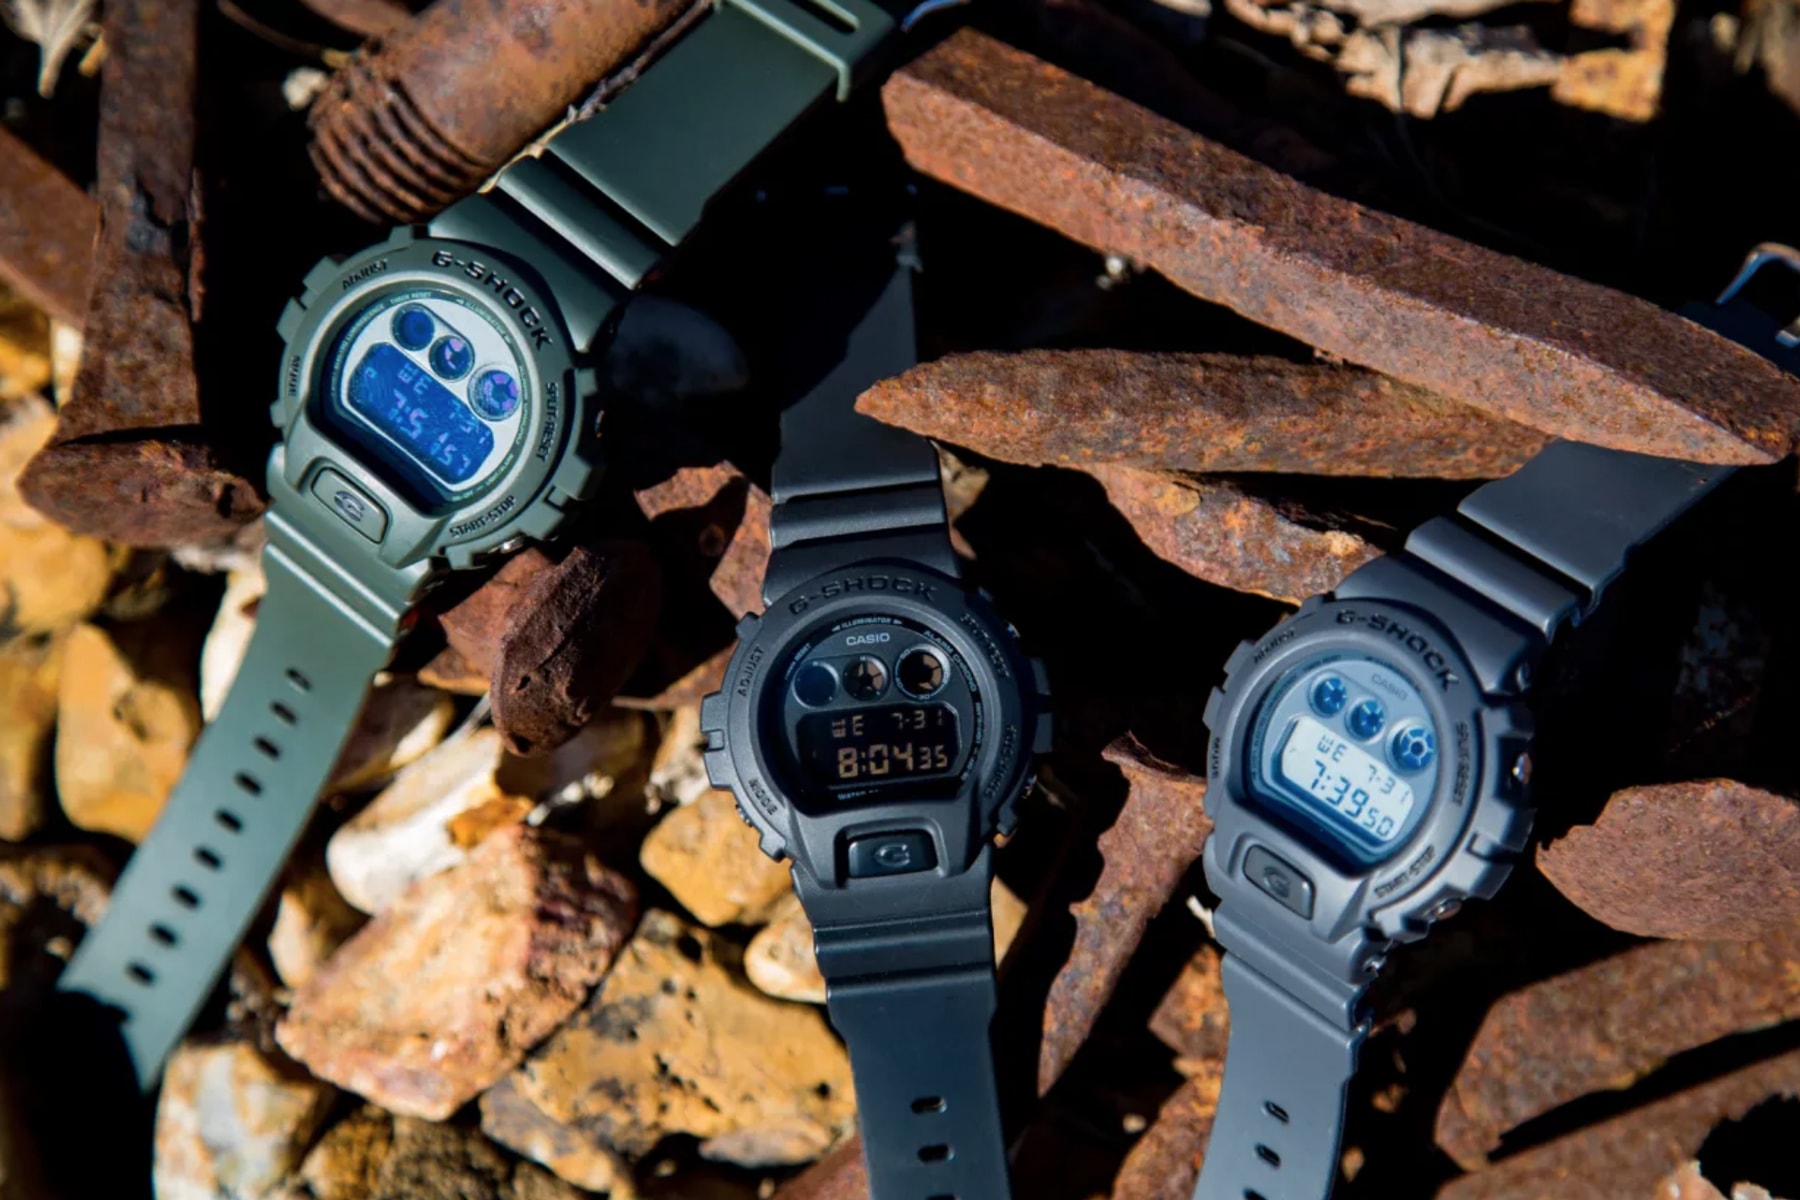 Casio G-Shock DW-6900 Military Series watches release purchase